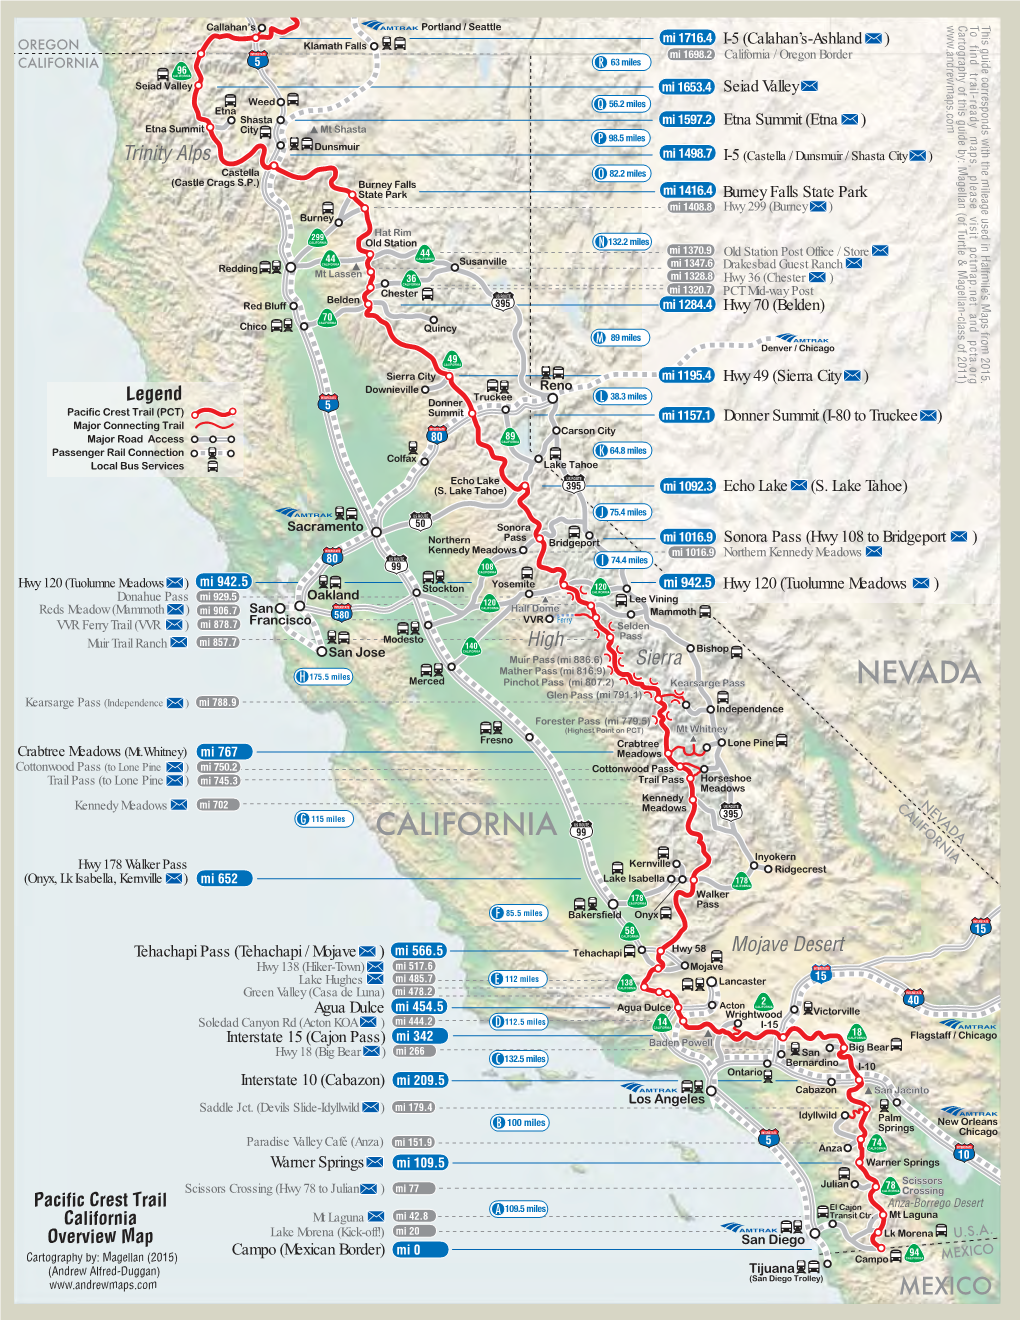 PCT California Overview